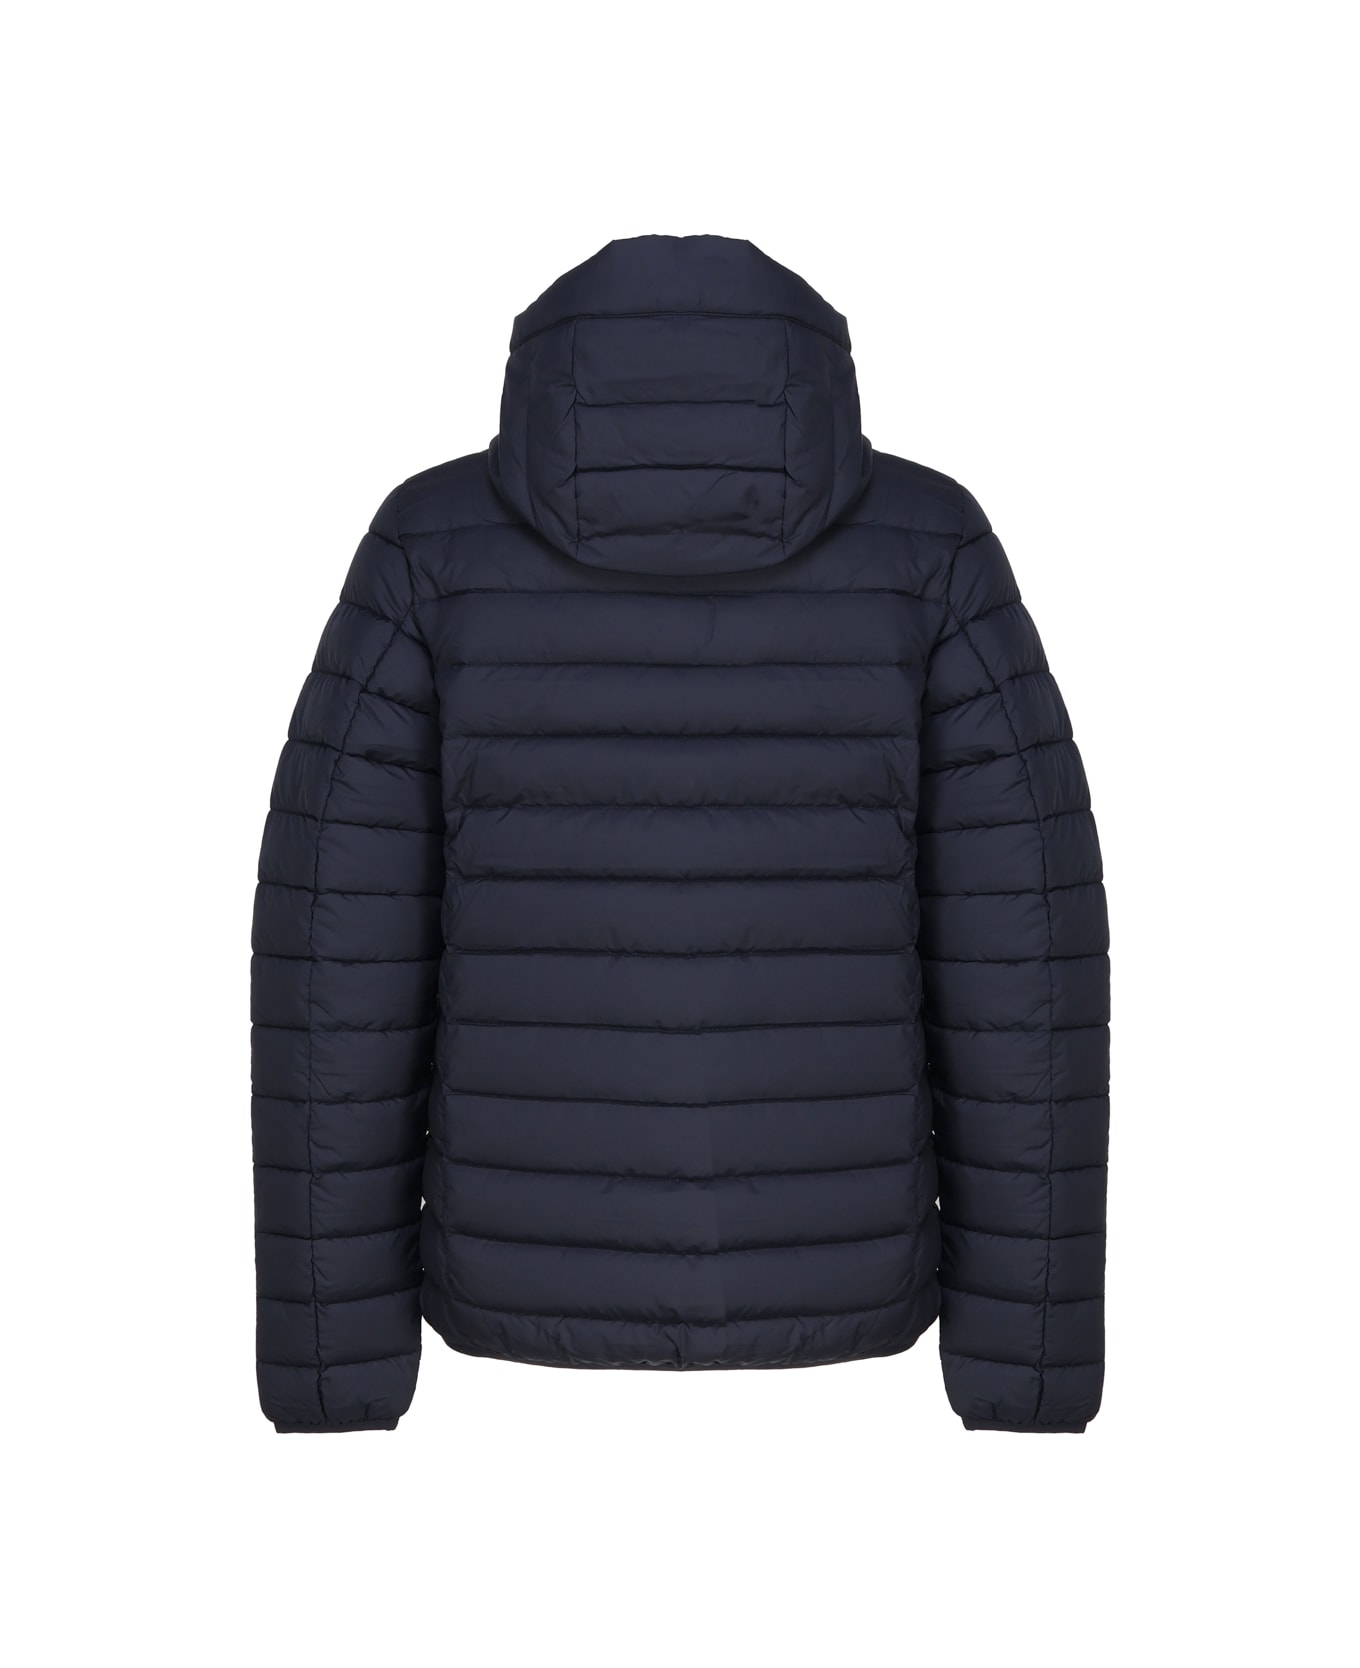 Save the Duck Jacket With Hood - Blue ダウンジャケット